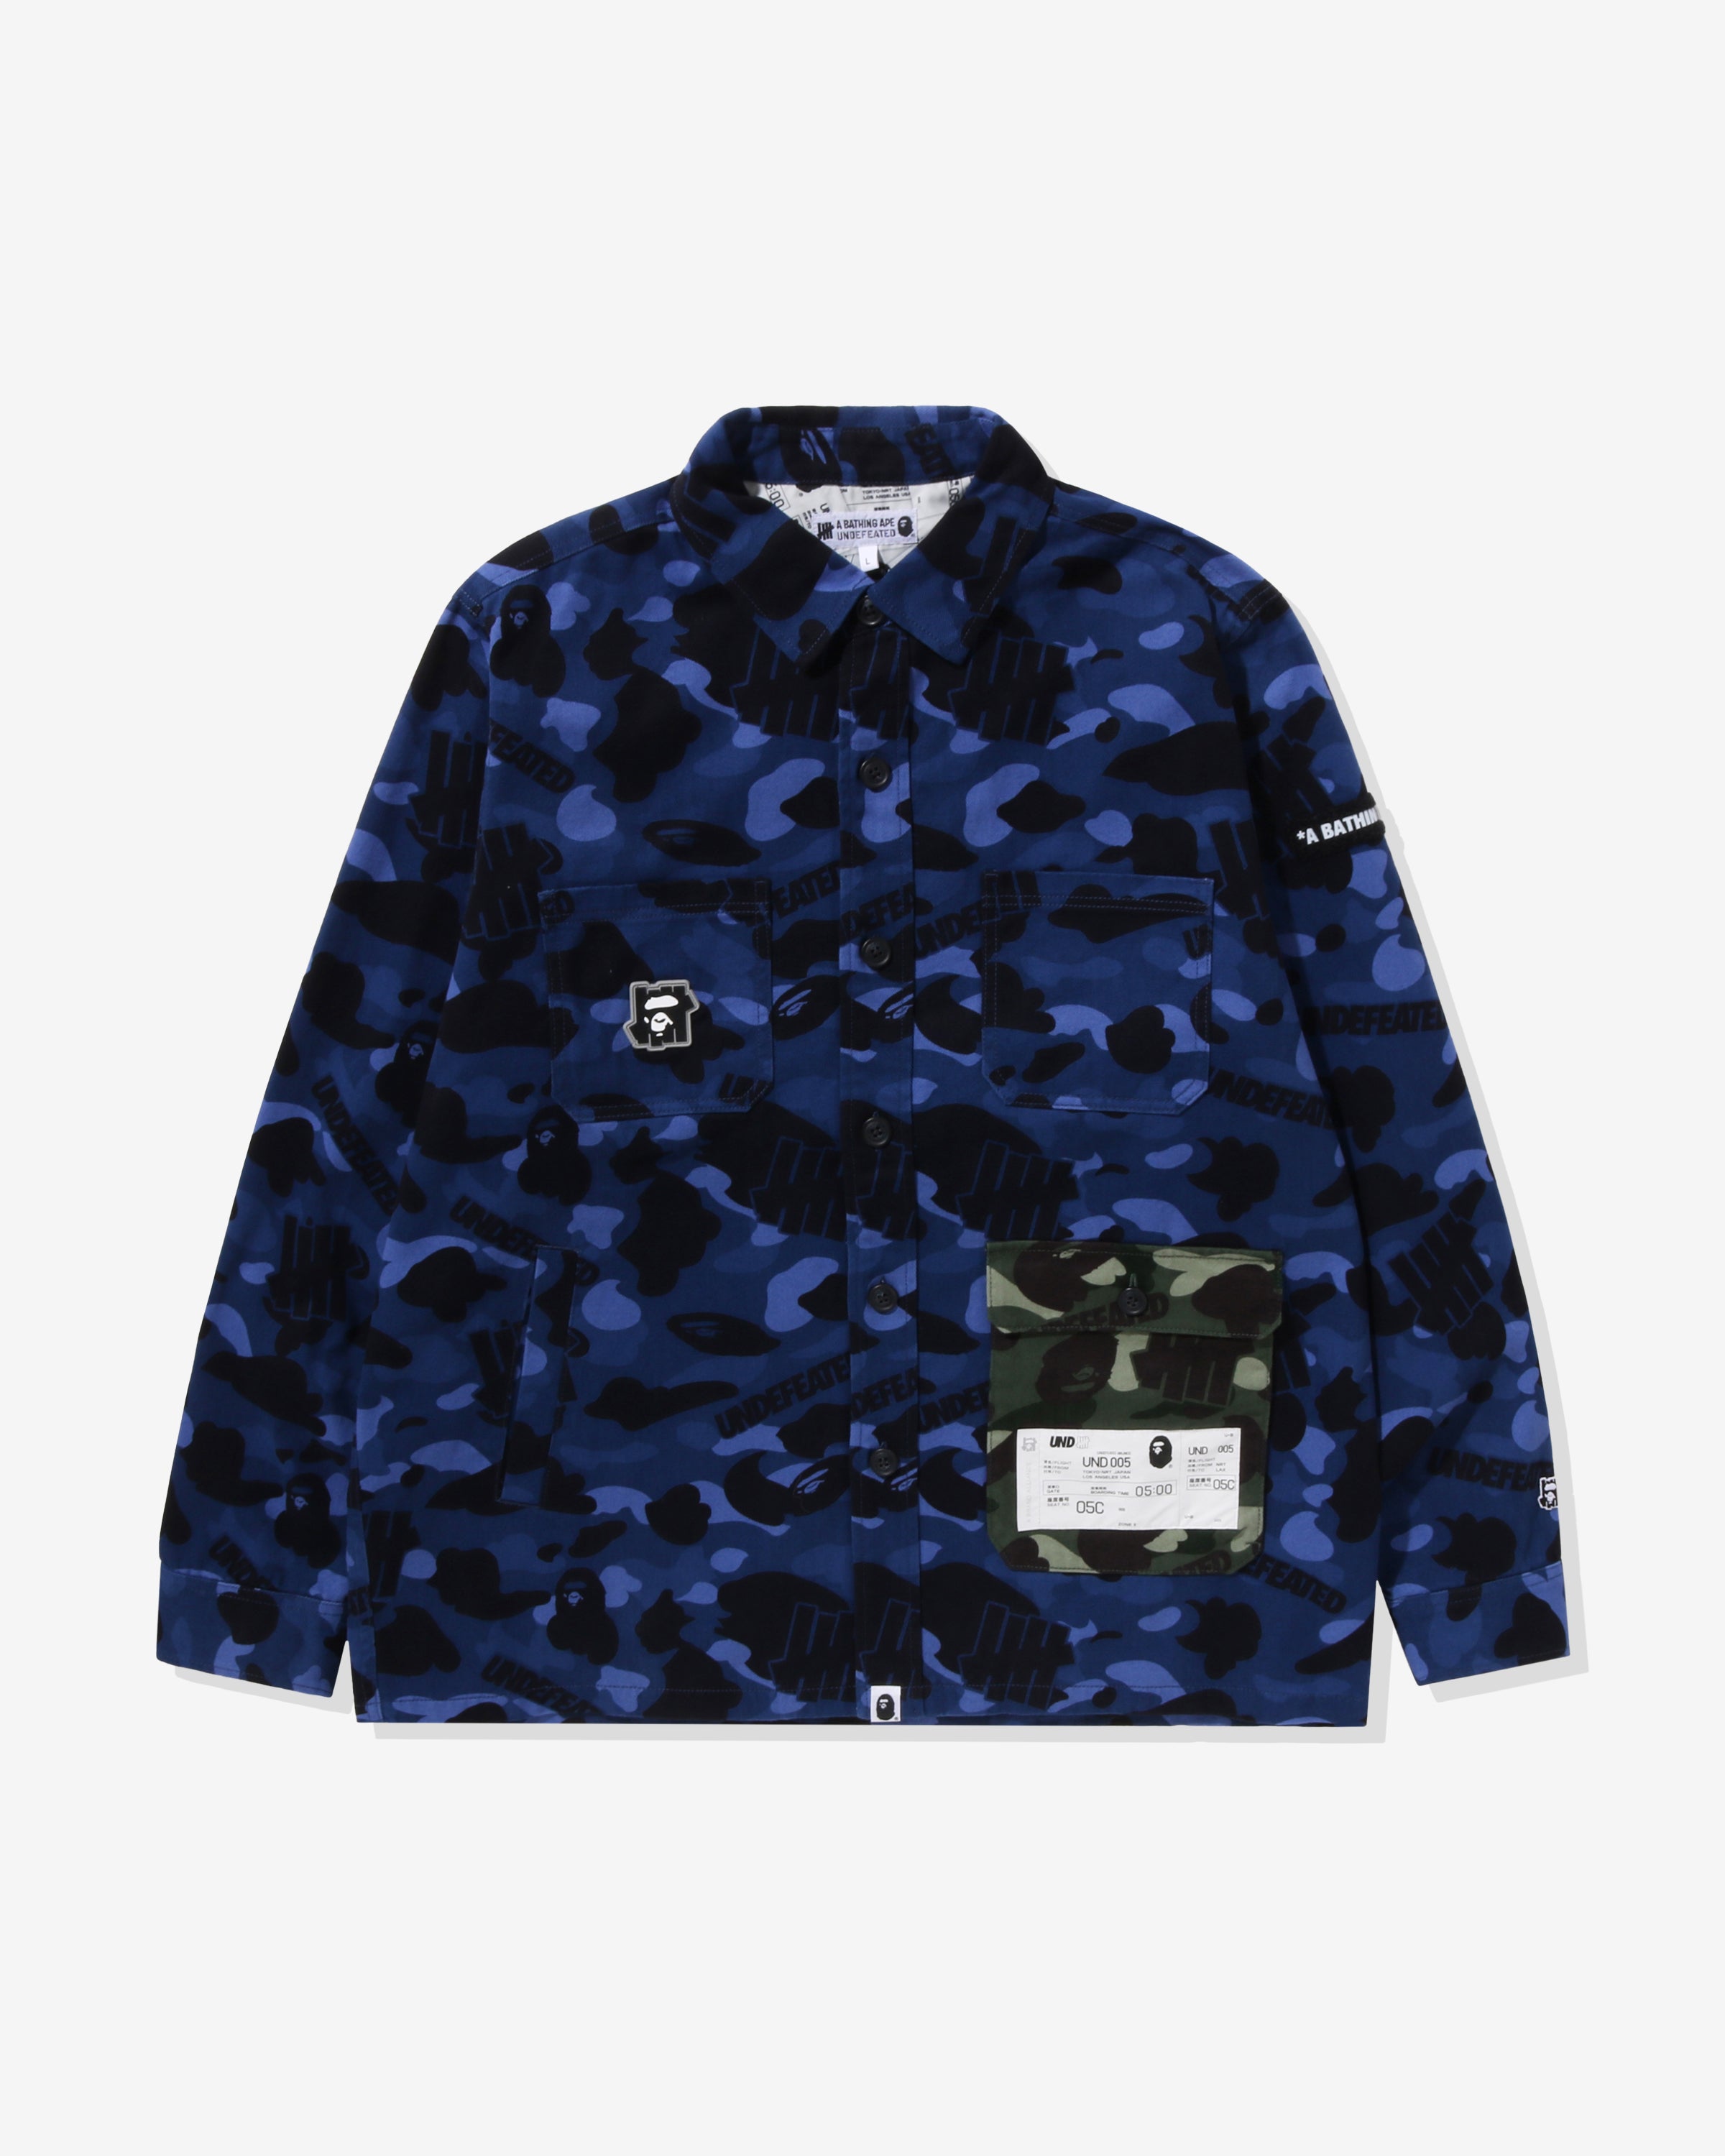 BAPE X UNDEFEATED COLOR CAMO FLANNEL JACKET - NAVY